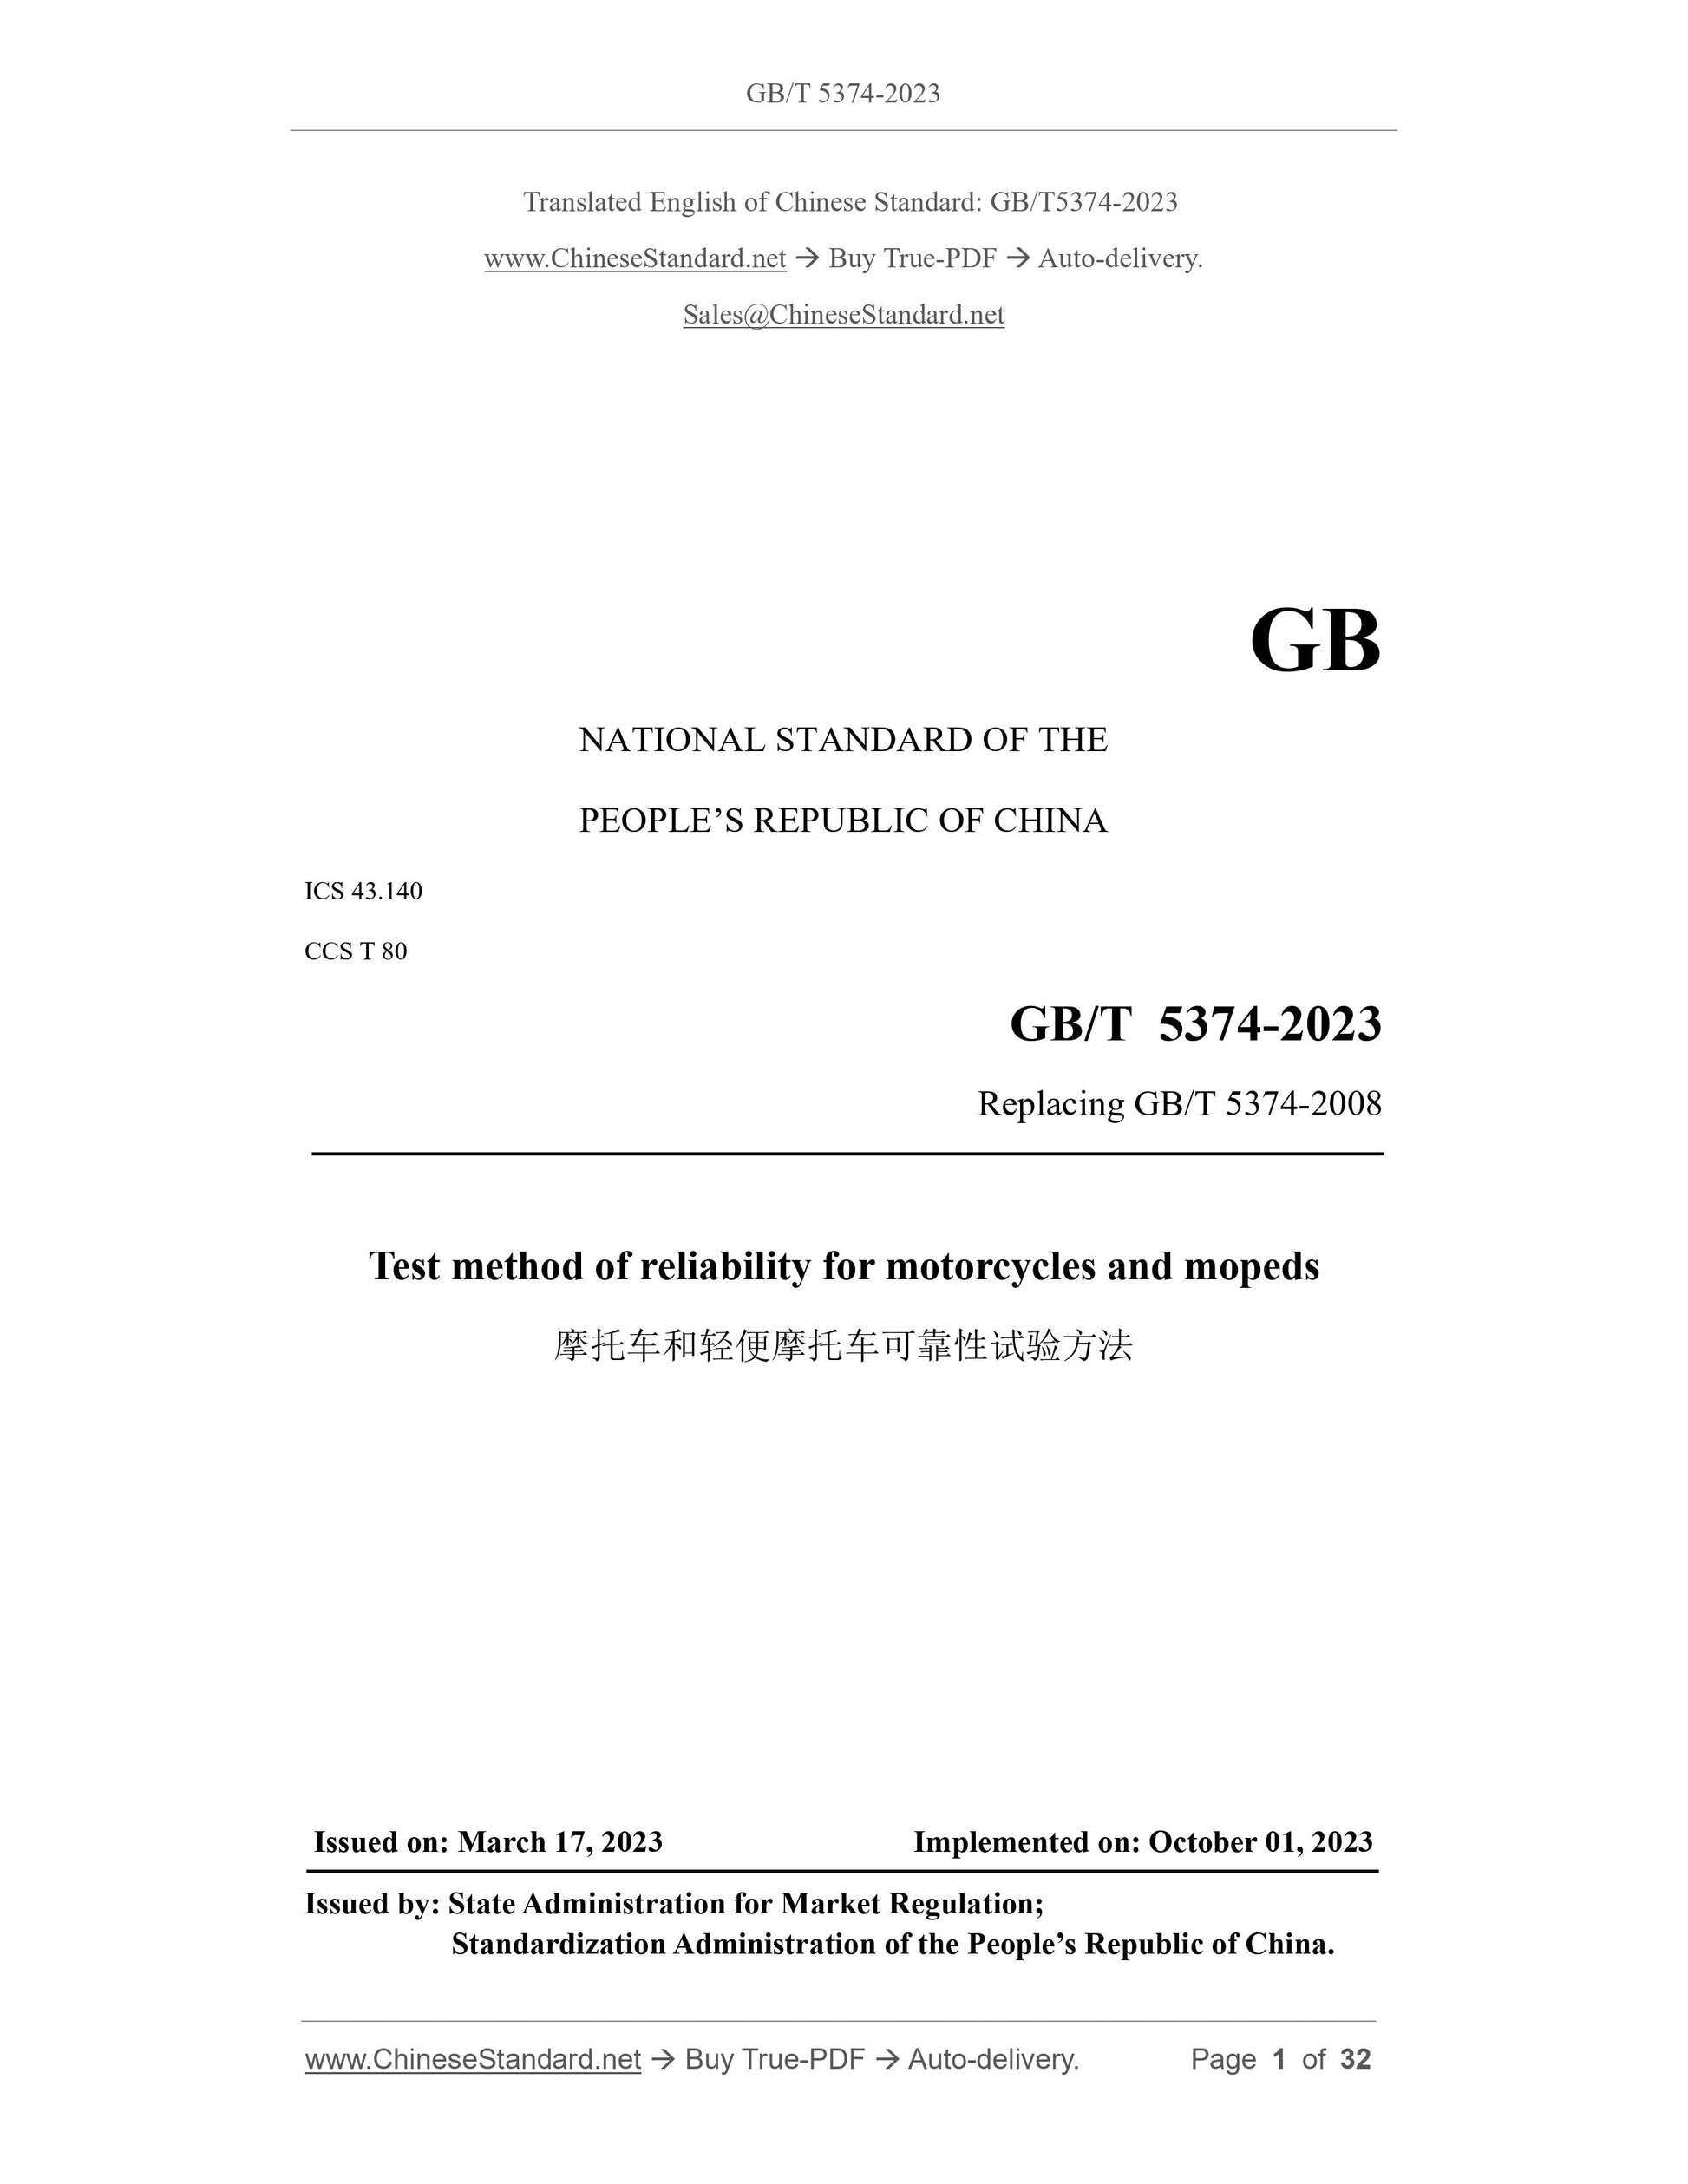 GB/T 5374-2023 Page 1